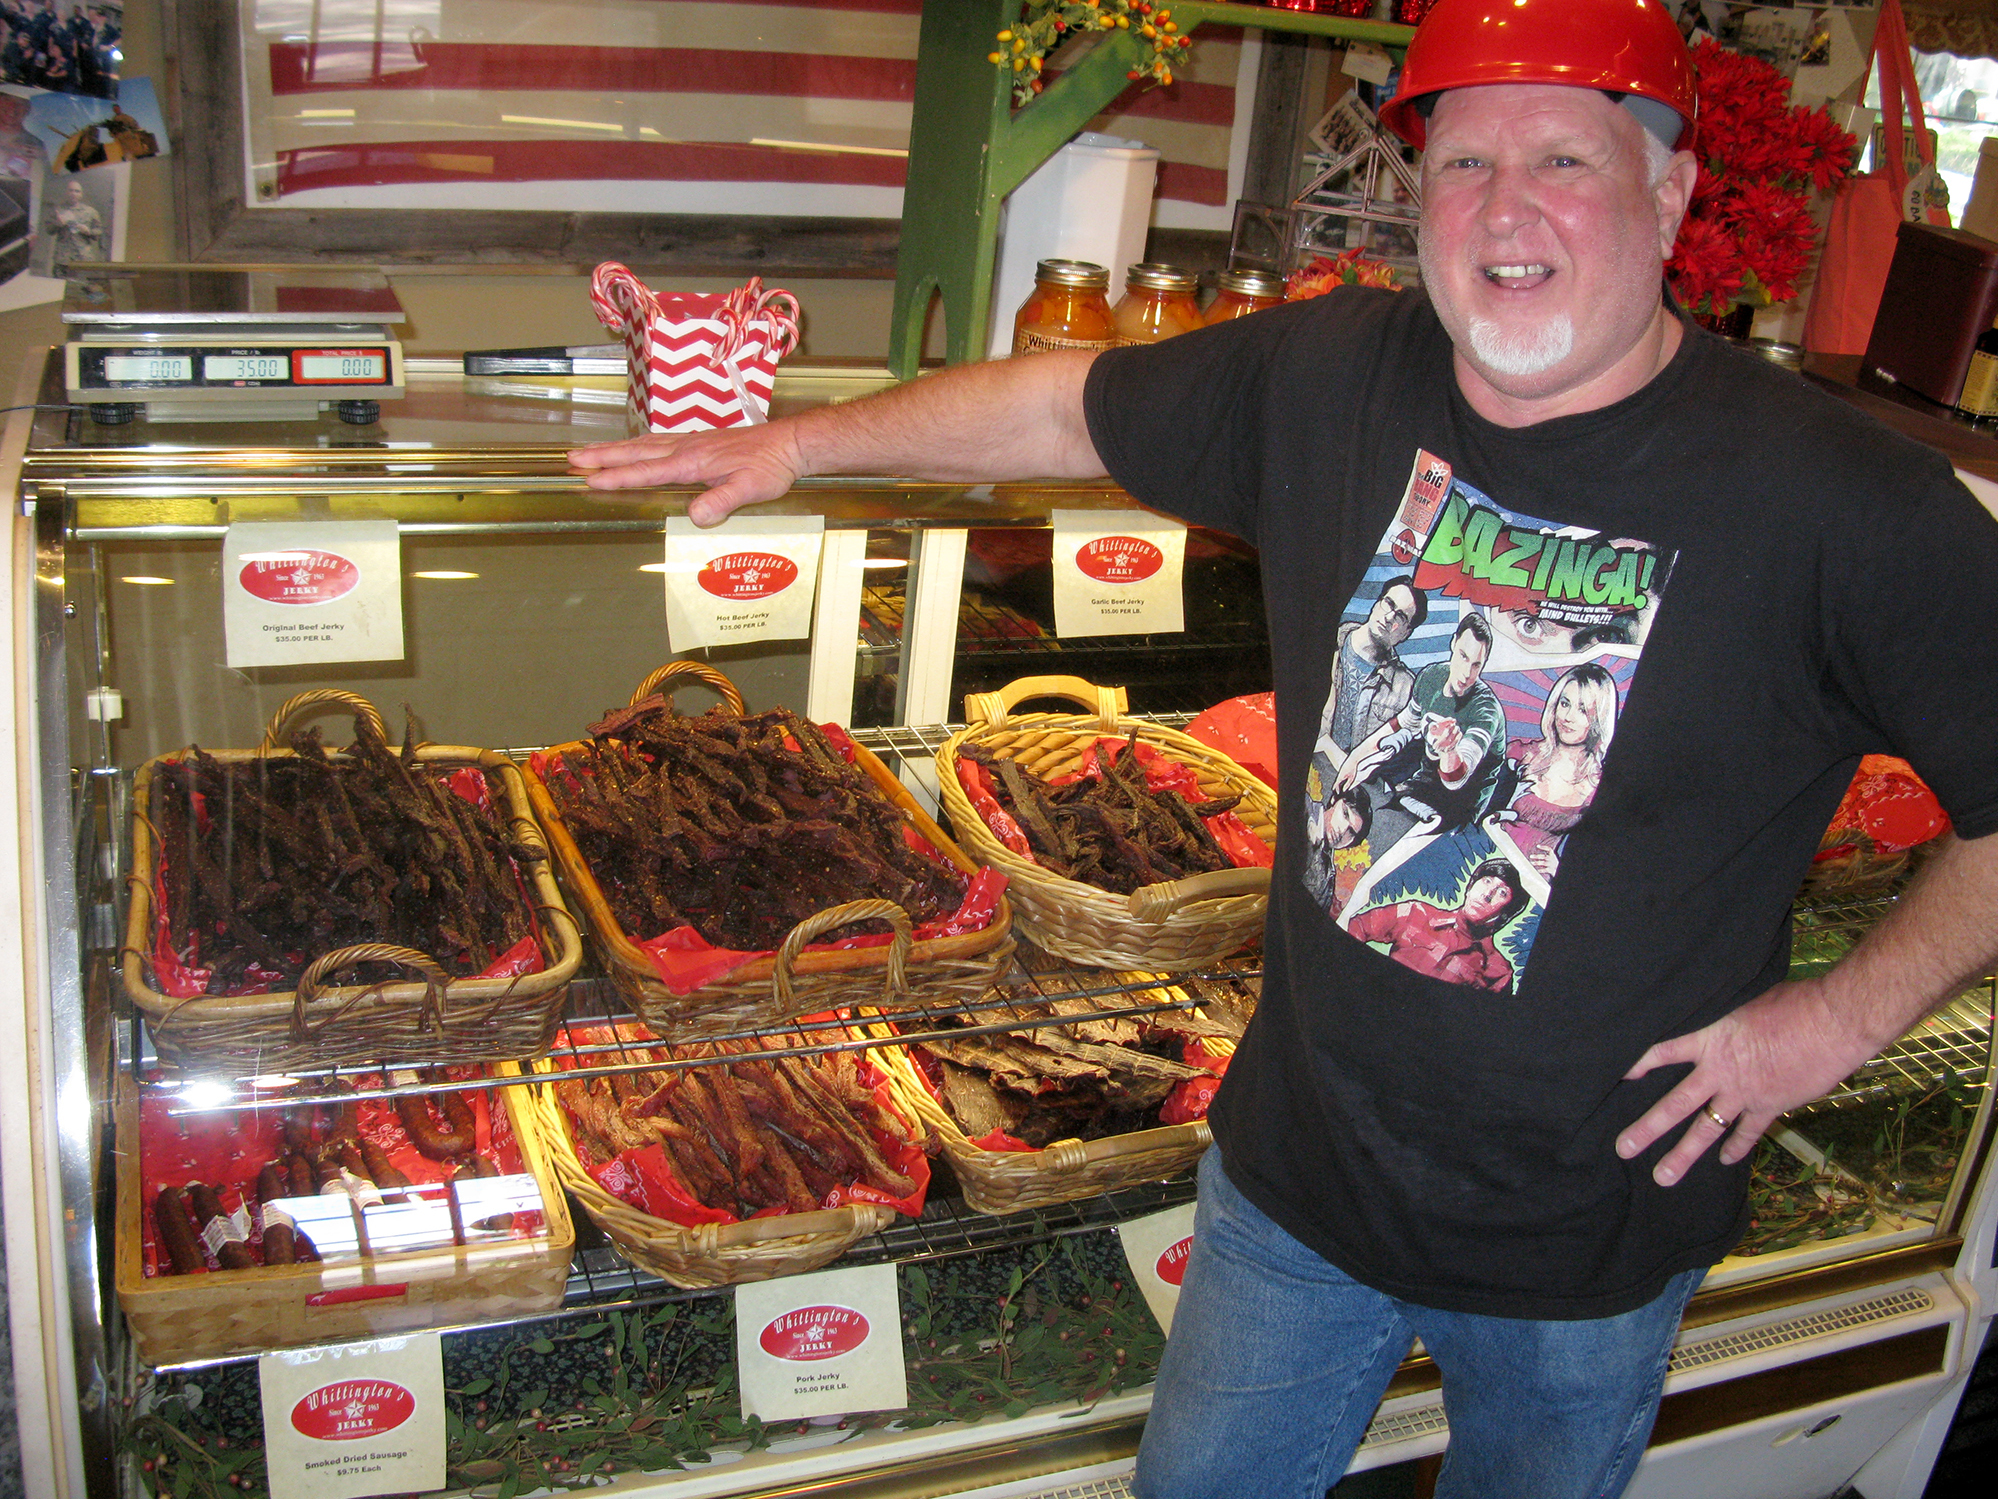 Sam Whittington makes jerky in Johnson City, Texas, the way his father did when he started the company in 1963. Jerky is so popular today that the Whittington's custom-smokes jerky for other customers.